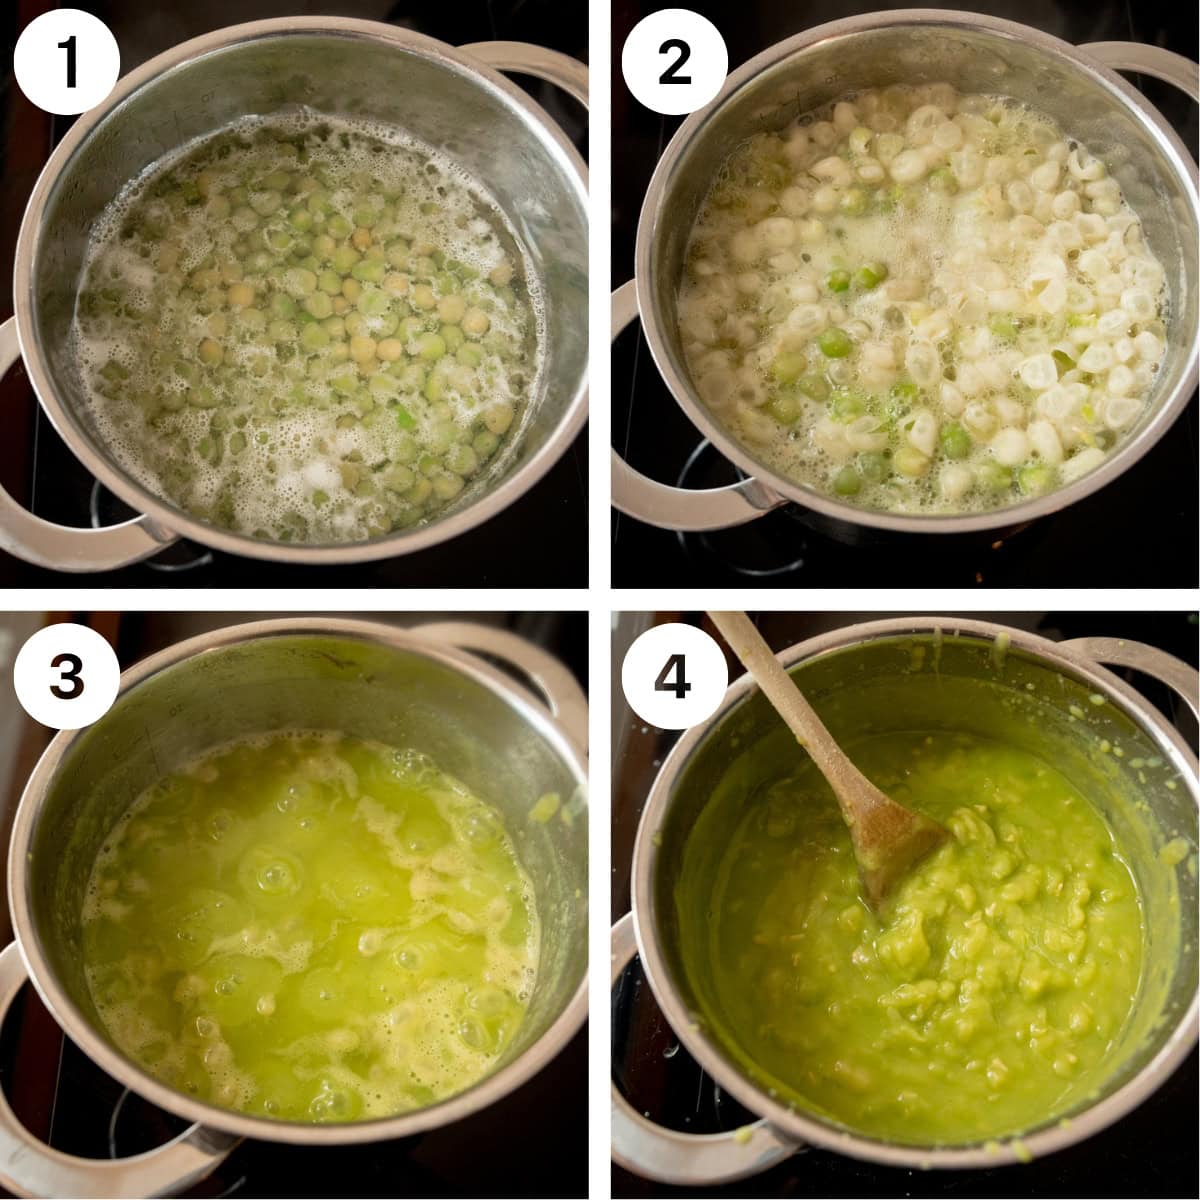 A collage of four images, separated by white lines, at the top left corner of each image, there is a white circle with the numbers 1-4 in each. In the top left image, there are some green peas, covered in water in a silver pot, which is on a black induction hob. The top right image shows green peas covered in water, which is boiling. This is in a silver pot, on a black induction hob. In the bottom left of the image, there is a silver pot of mushy peas, on a black induction hob. And in the bottom right of the image there is a silver pot if cooked mushy peas, with a wooden spoon sticking out of the dish. This is on a black induction hob.